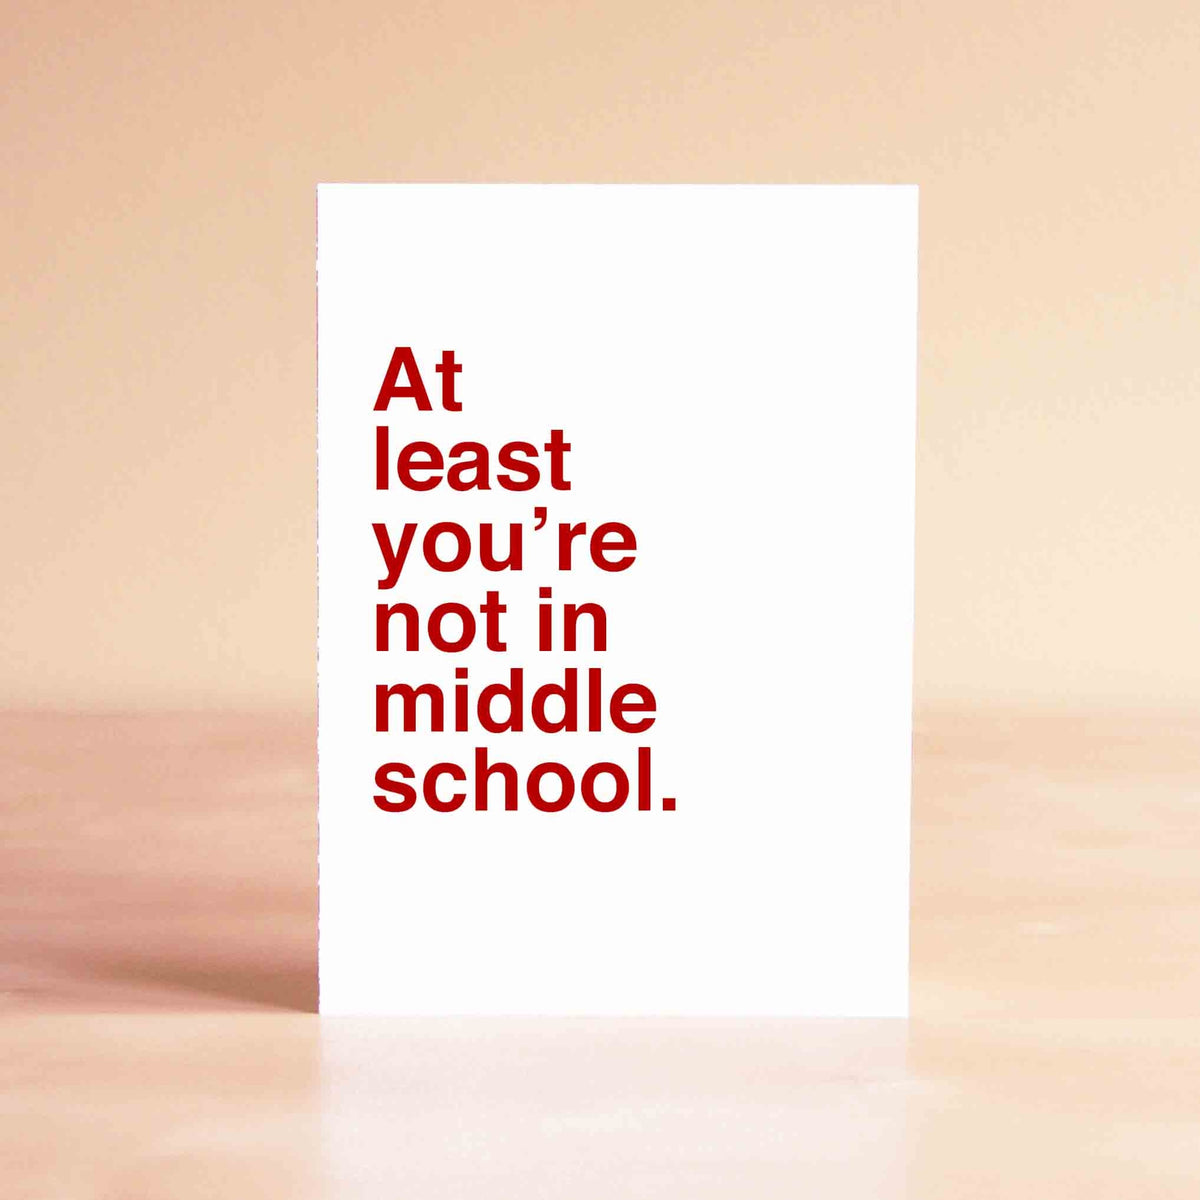 White card with red lettering reading "At least you're not in middle school."